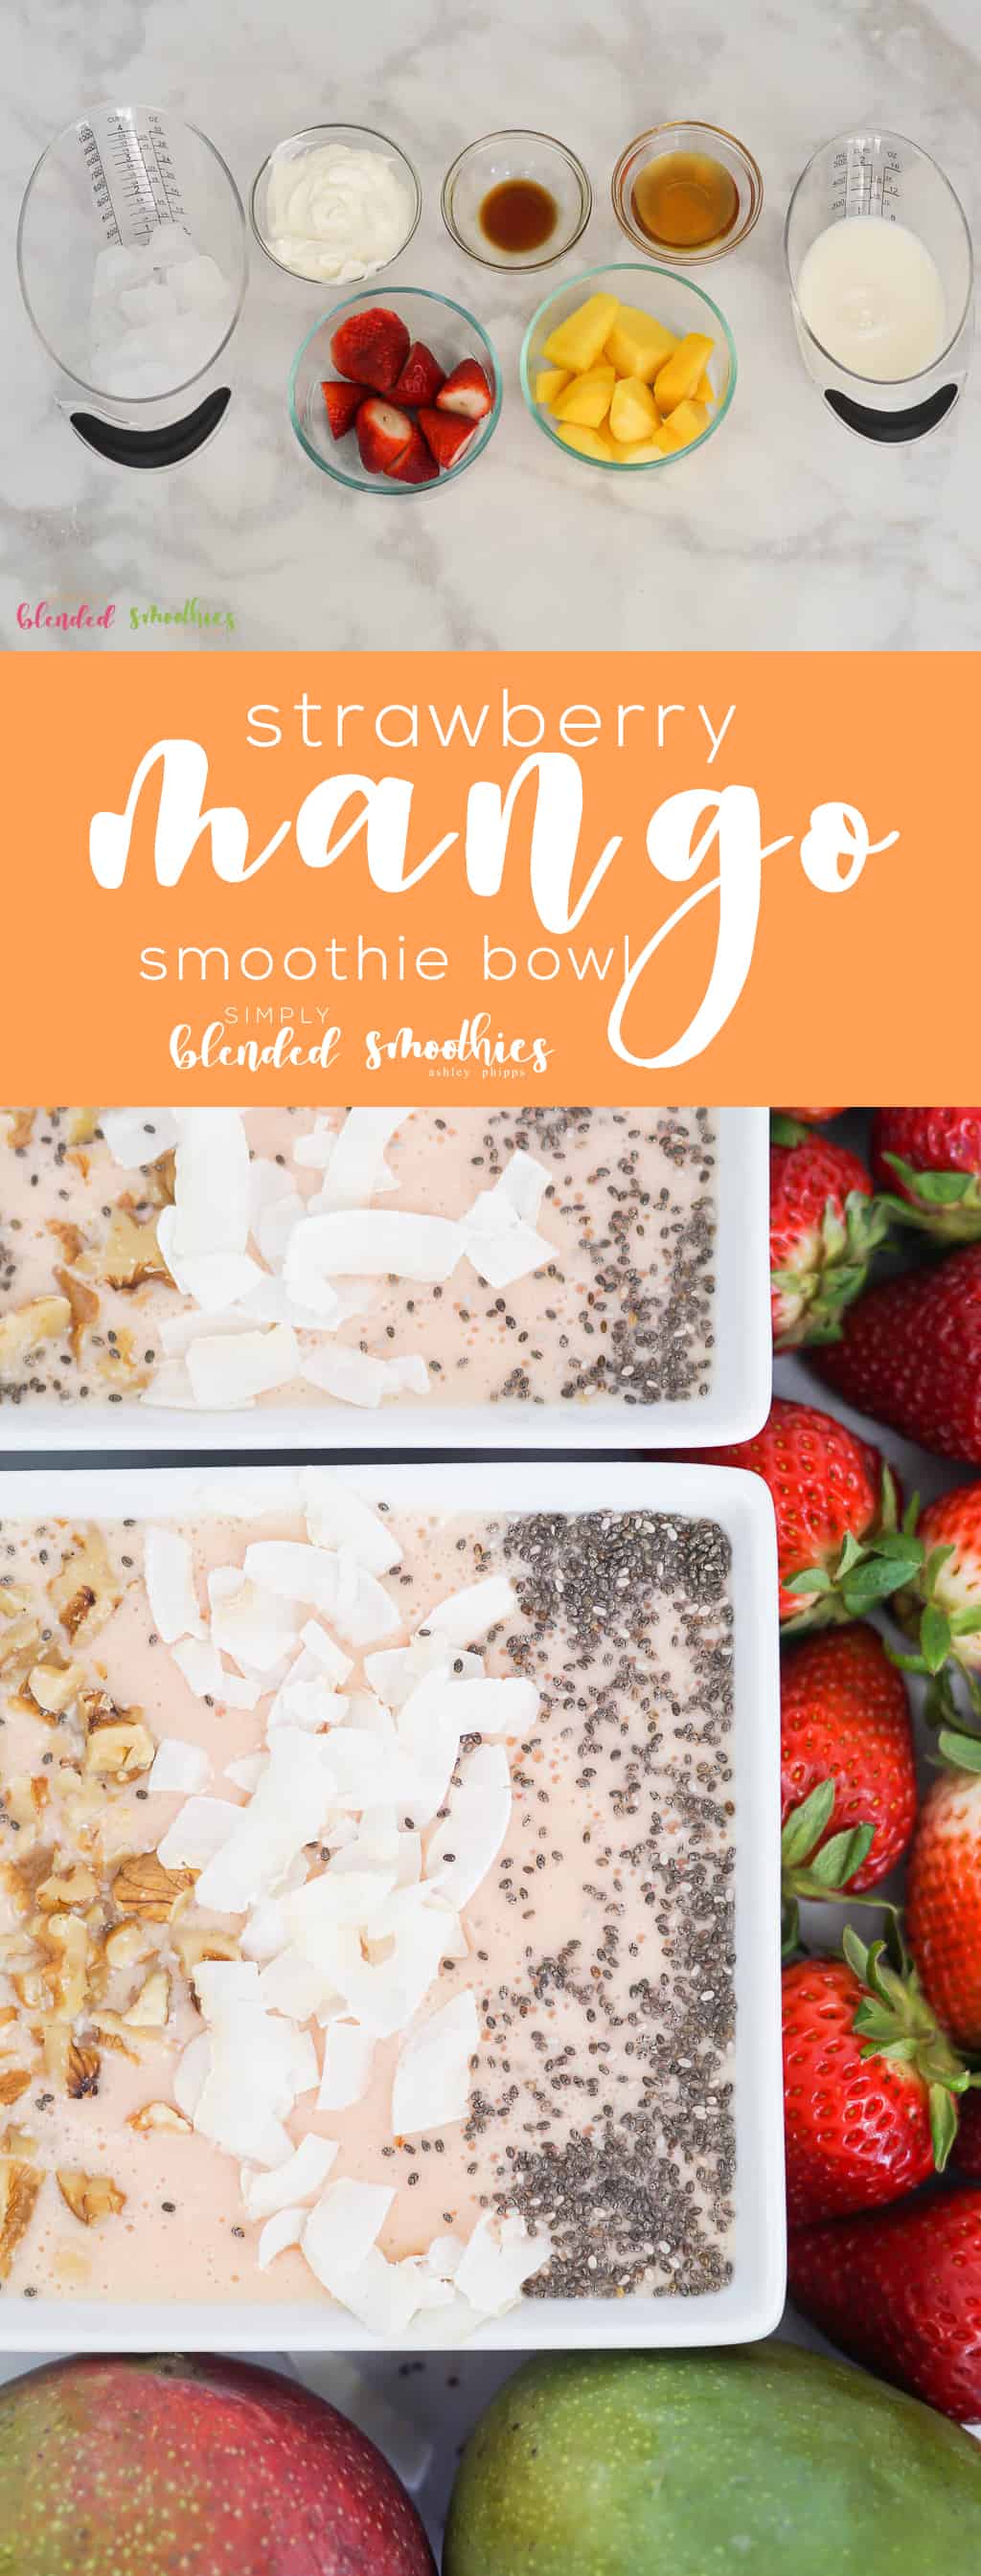 Strawberry Mango Smoothie Bowl - A Delicious And Tropical Smoothie